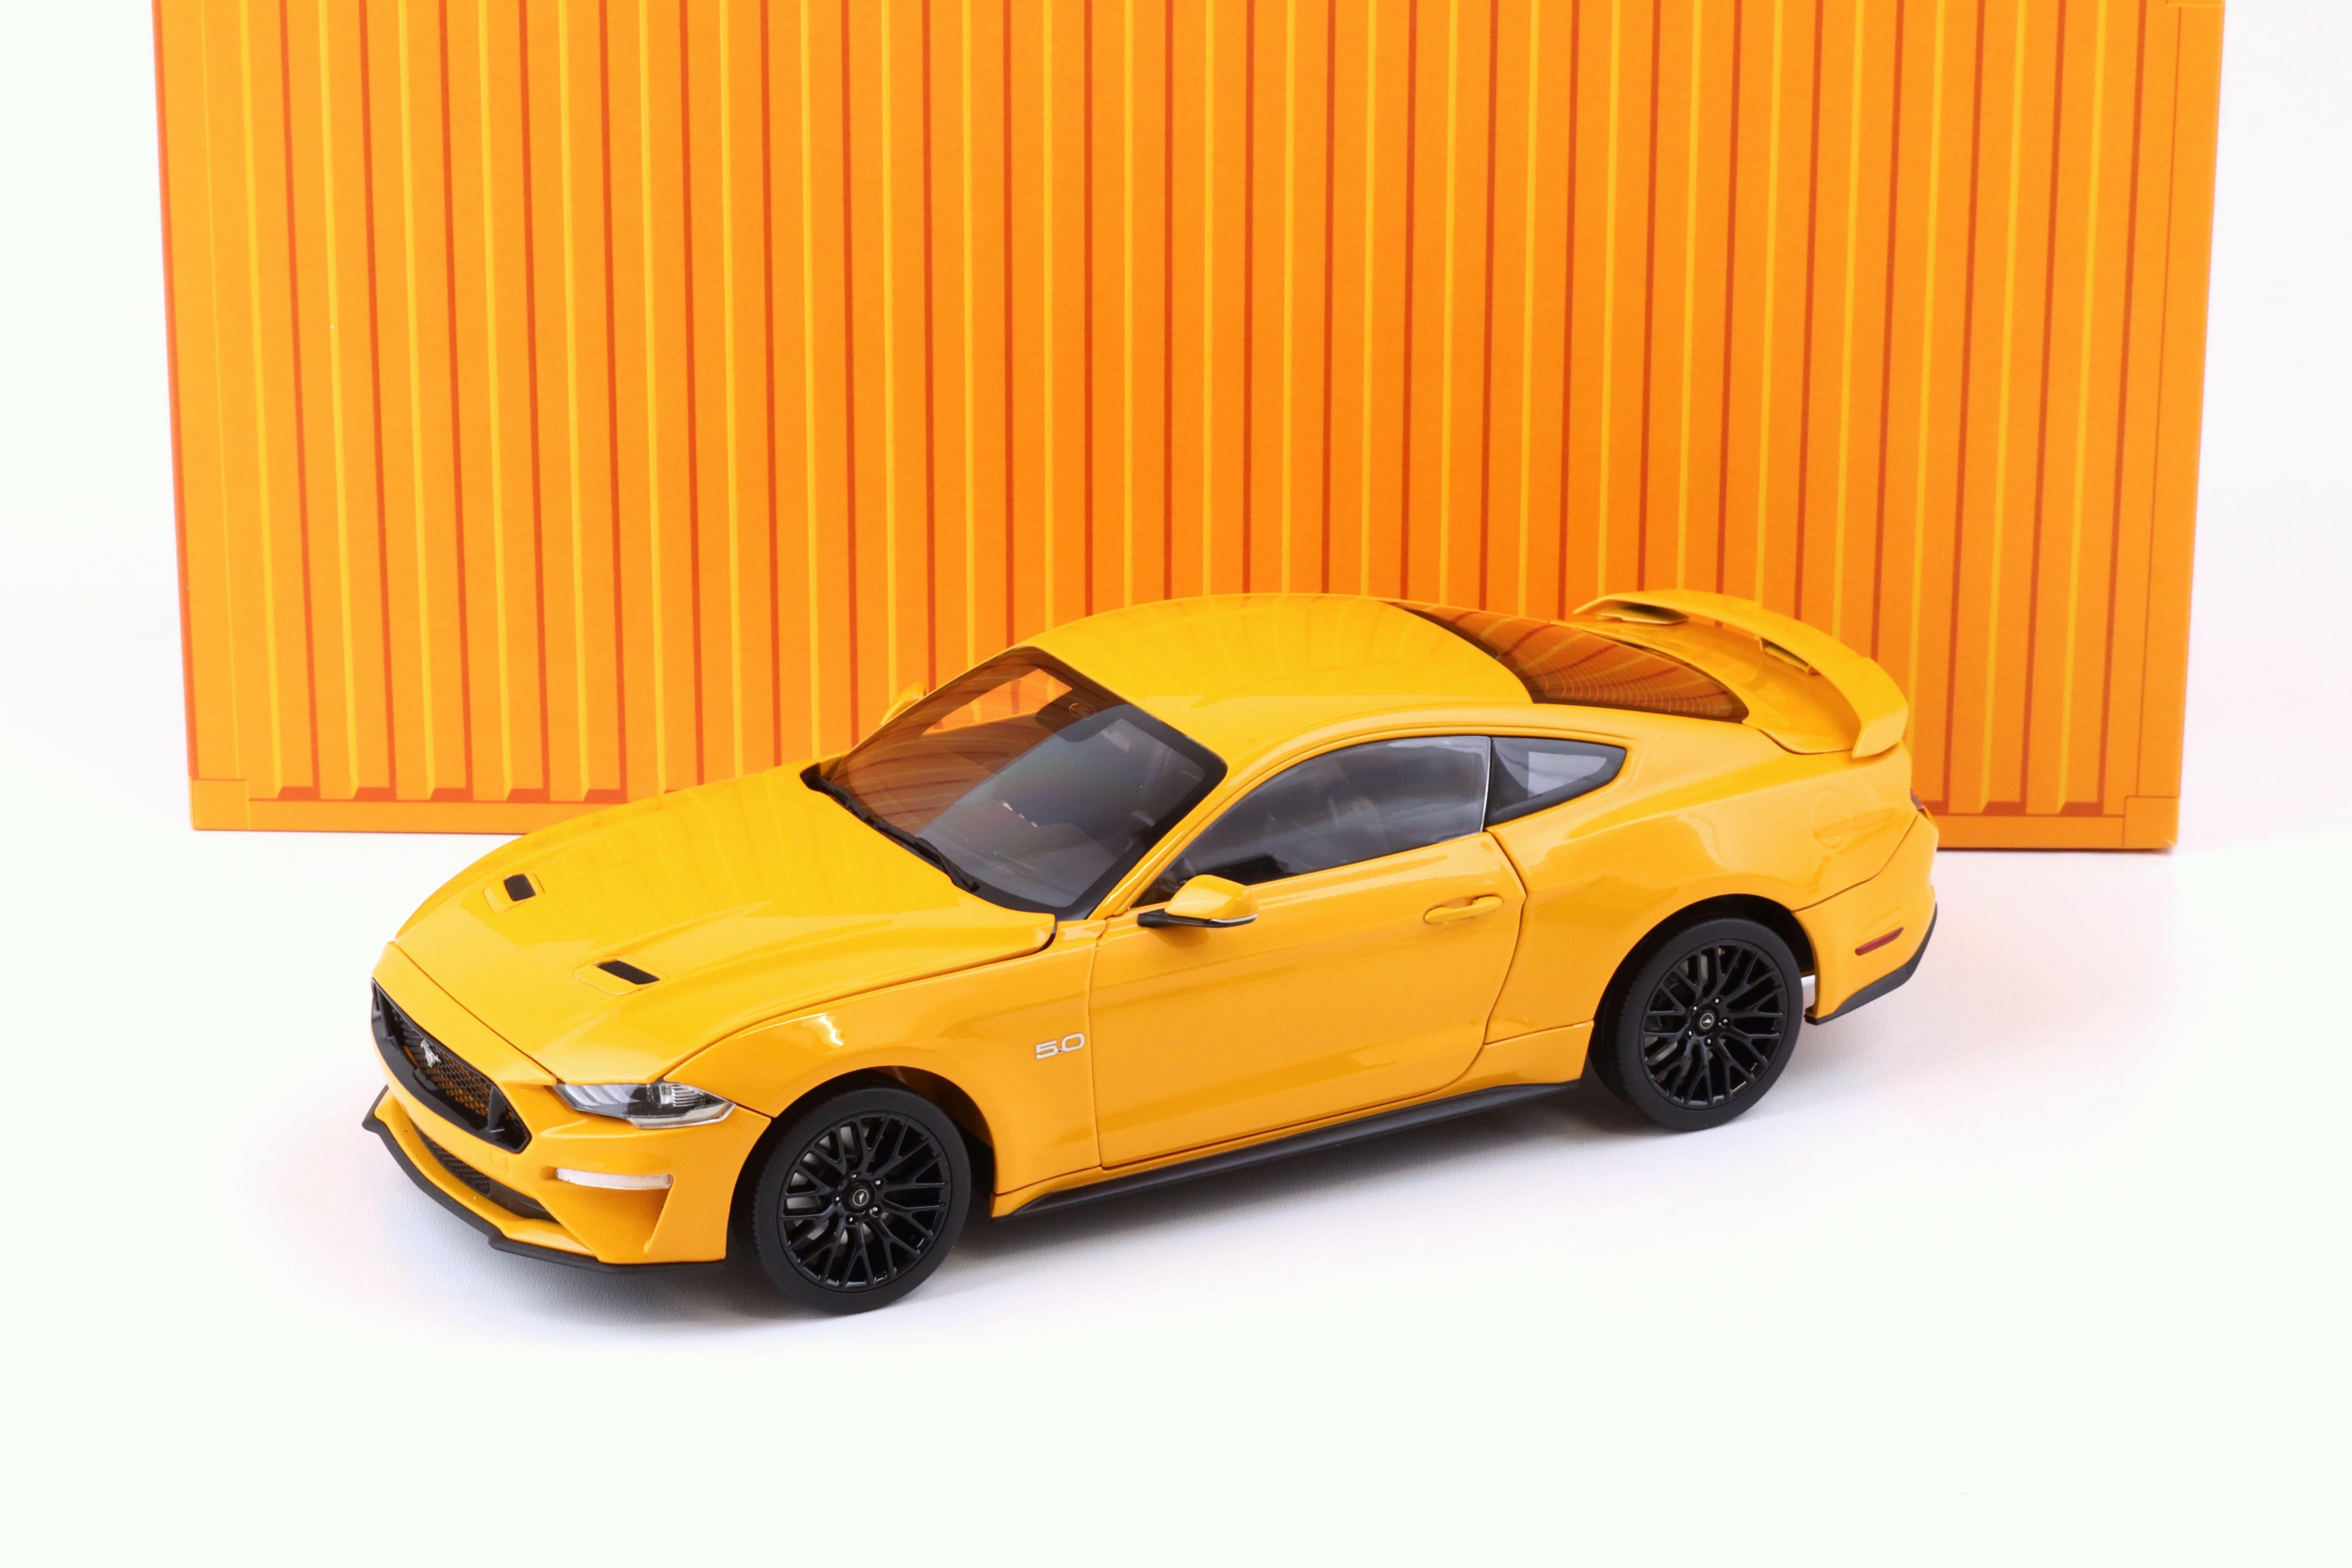 1:18 Diecast Masters 2019 Ford Mustang GT 5.0 Coupe LHD Fury orange